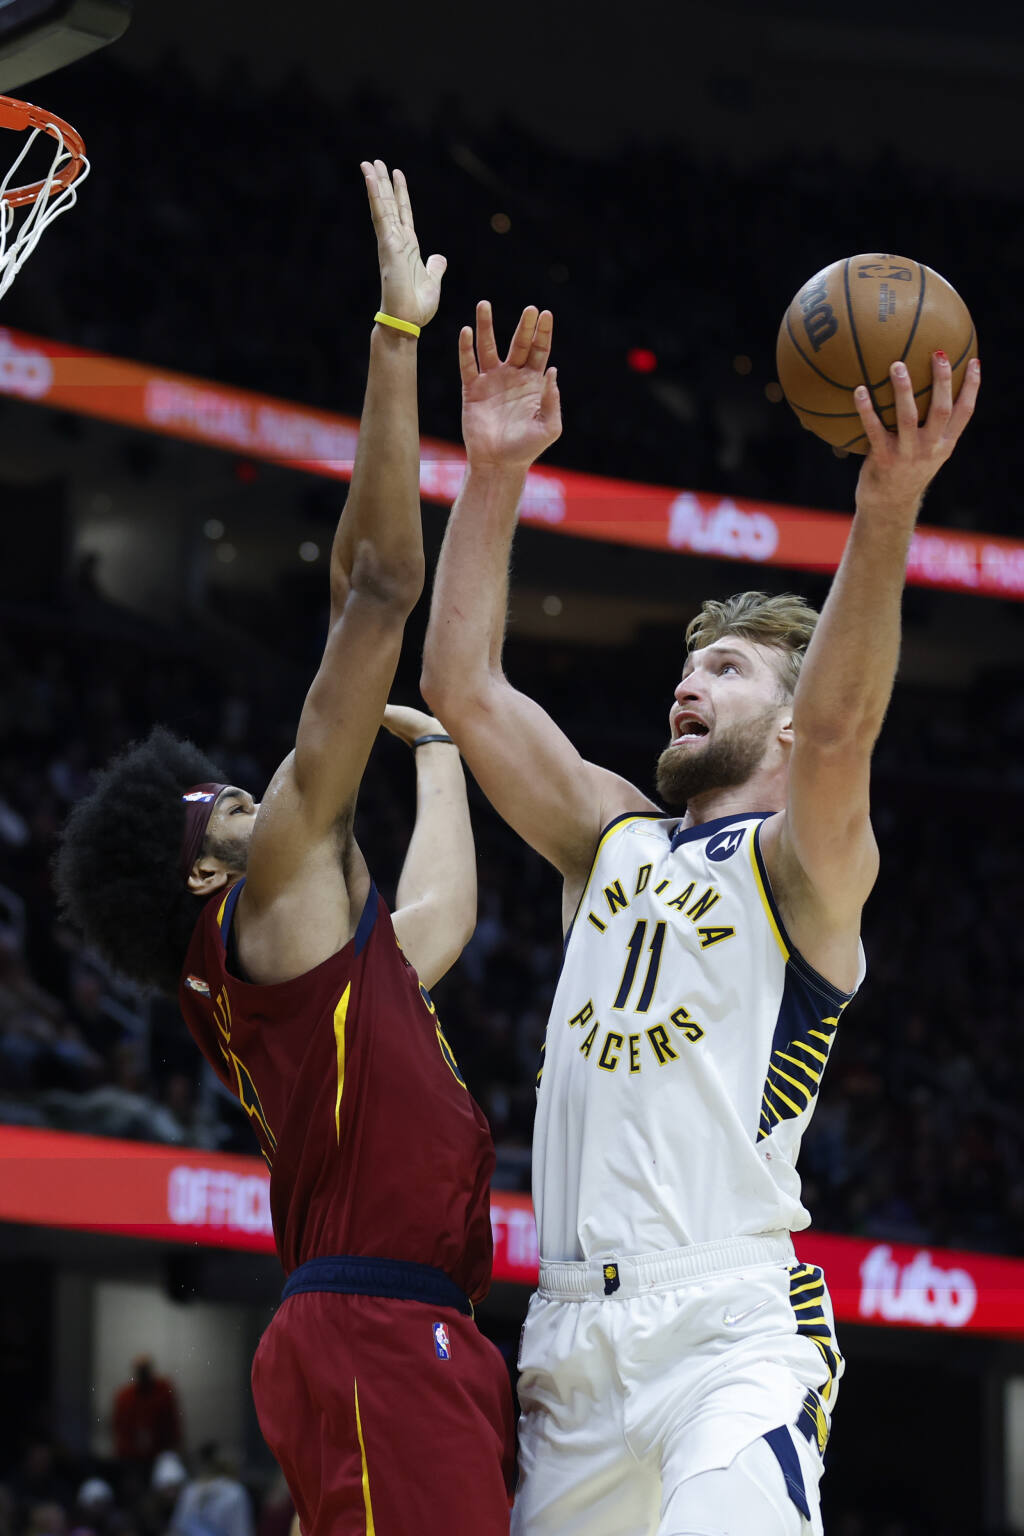 Adjusting to change for Domantas Sabonis and the Indiana Pacers